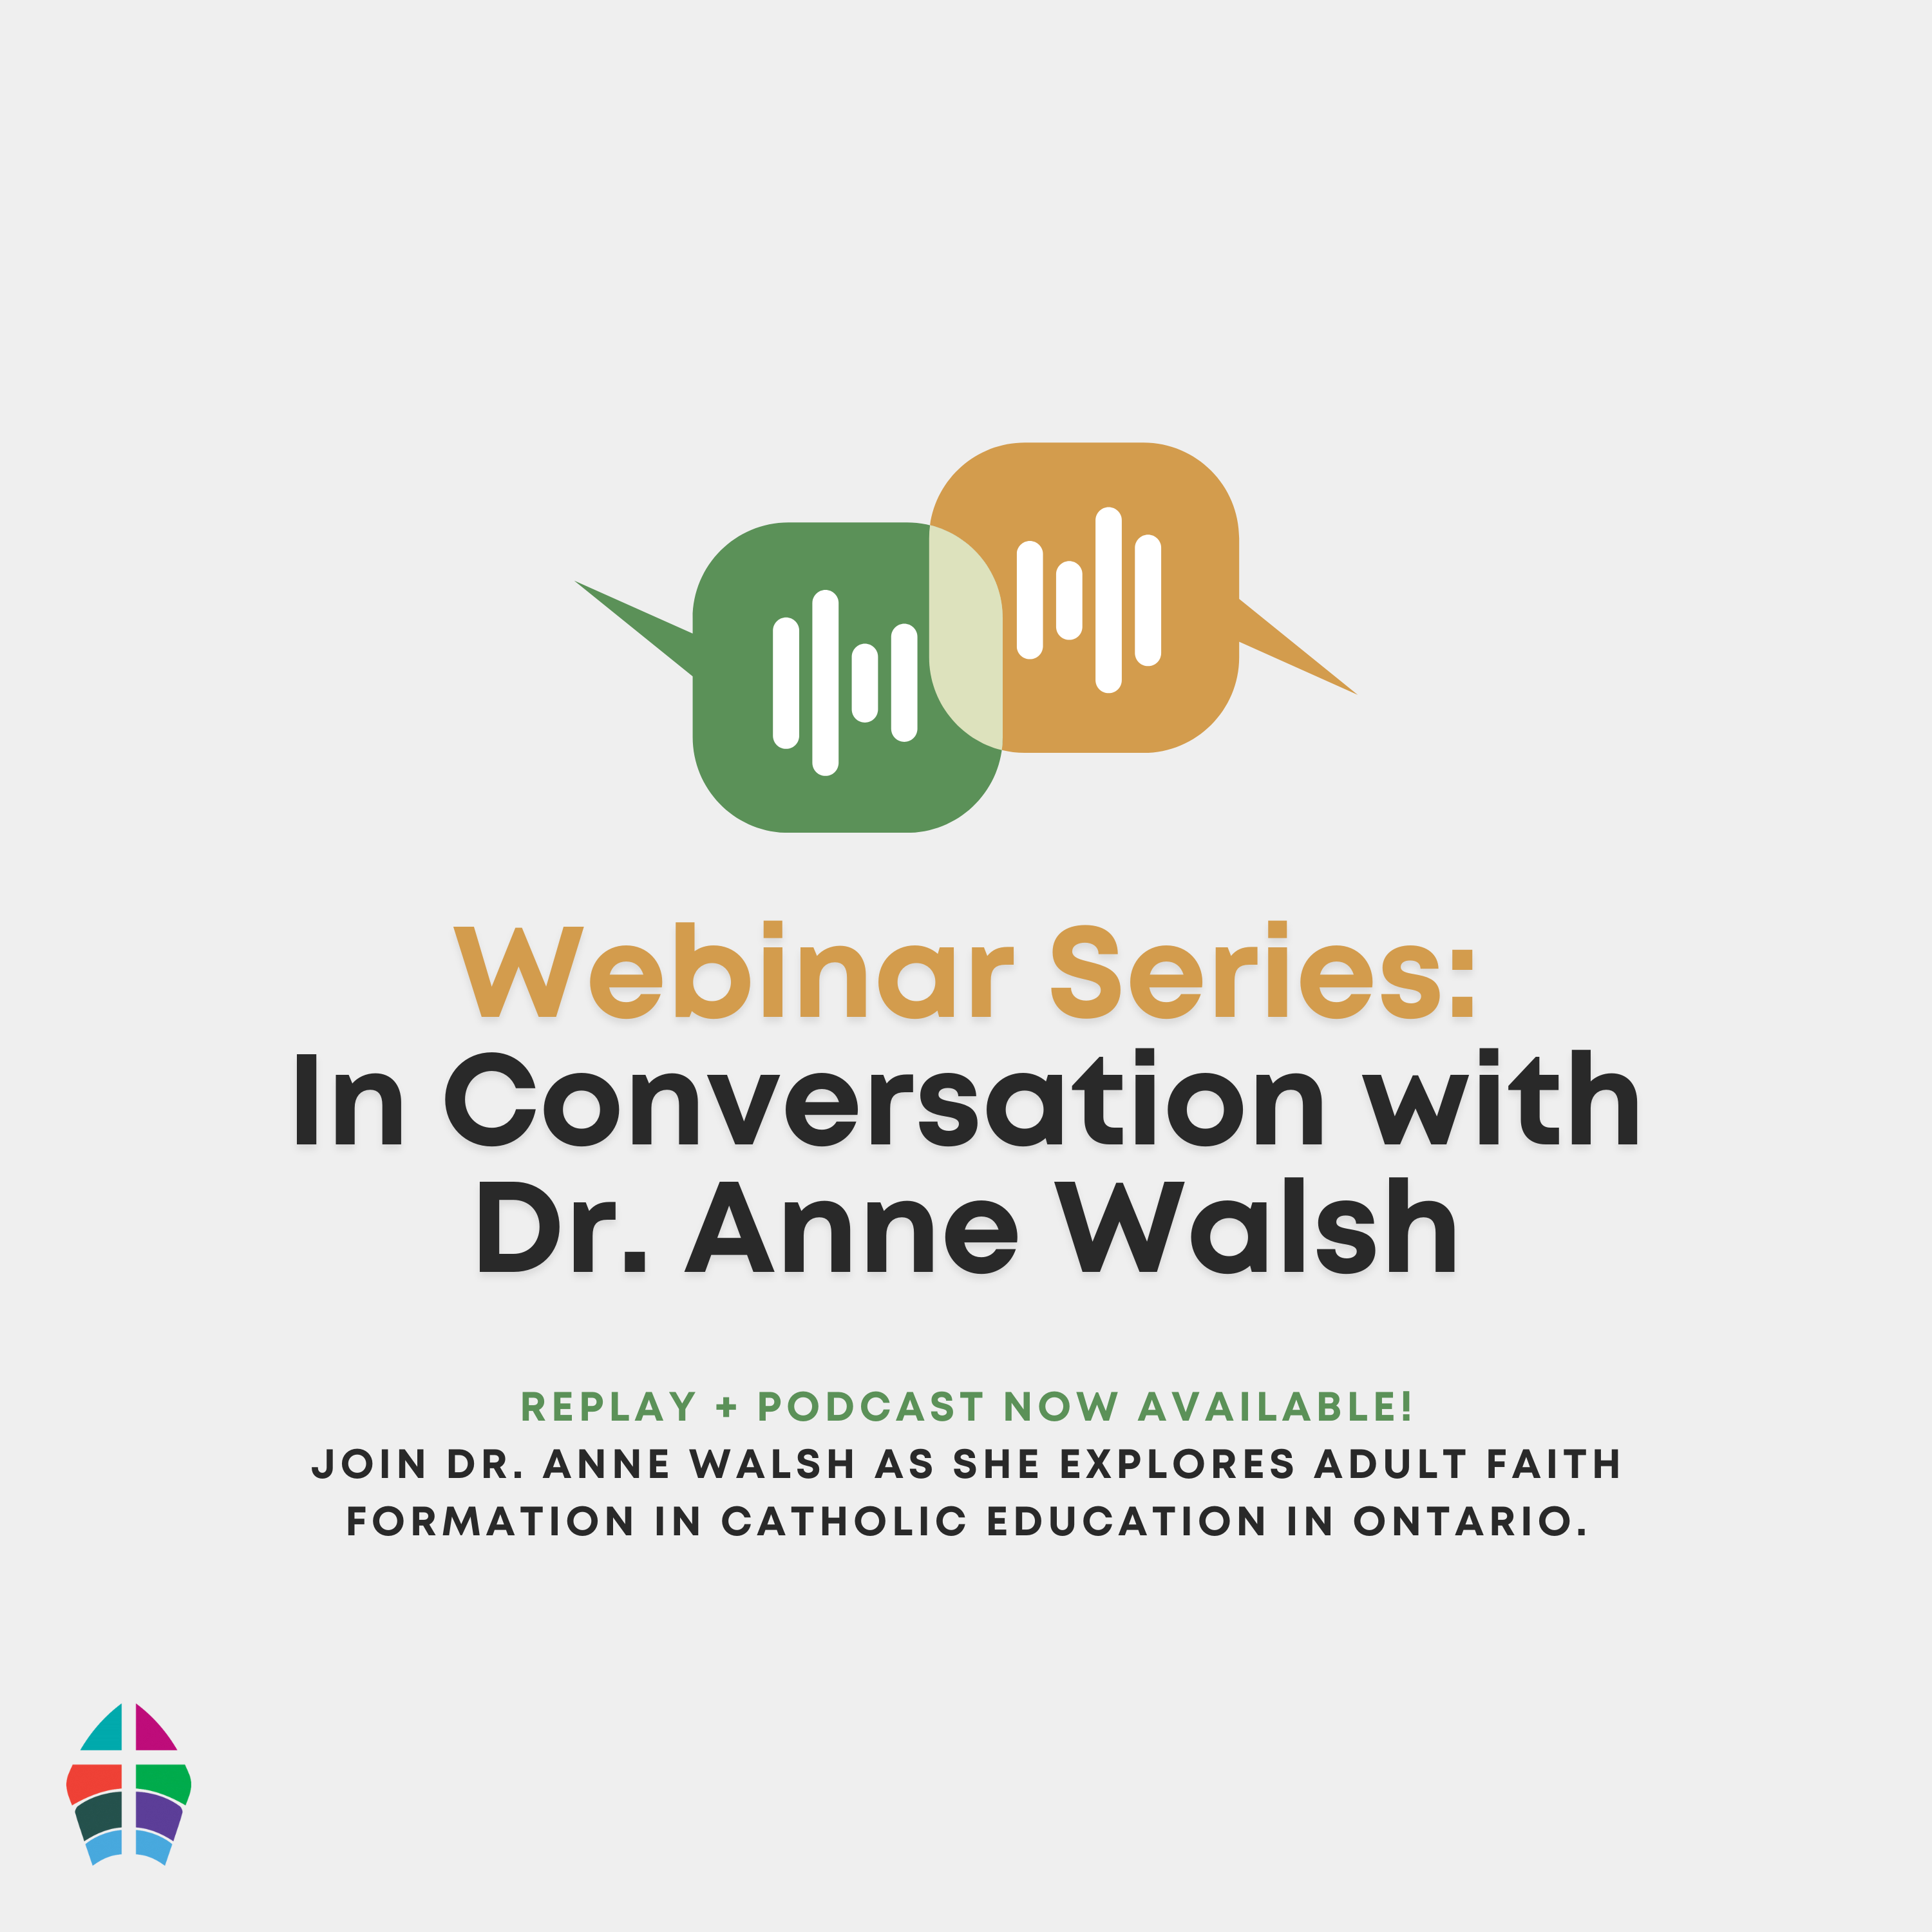 Webinar Series Replay now Available